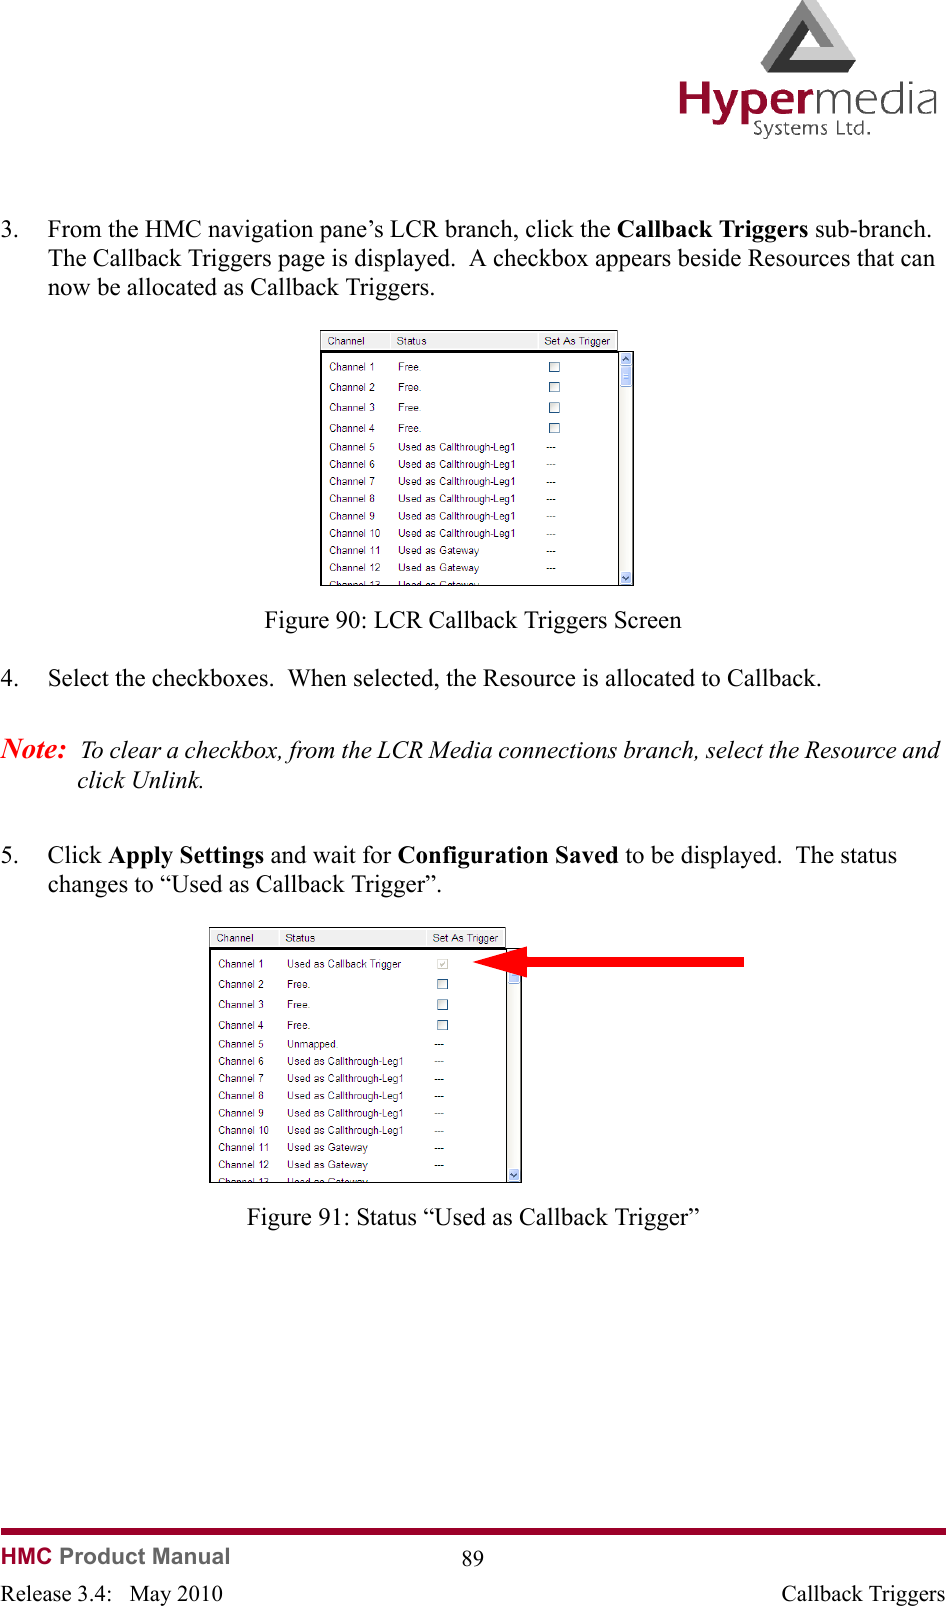 HMC Product Manual  89Release 3.4:   May 2010 Callback Triggers3. From the HMC navigation pane’s LCR branch, click the Callback Triggers sub-branch.  The Callback Triggers page is displayed.  A checkbox appears beside Resources that can now be allocated as Callback Triggers.              Figure 90: LCR Callback Triggers Screen4. Select the checkboxes.  When selected, the Resource is allocated to Callback.Note:  To clear a checkbox, from the LCR Media connections branch, select the Resource and click Unlink.5. Click Apply Settings and wait for Configuration Saved to be displayed.  The status changes to “Used as Callback Trigger”.              Figure 91: Status “Used as Callback Trigger”